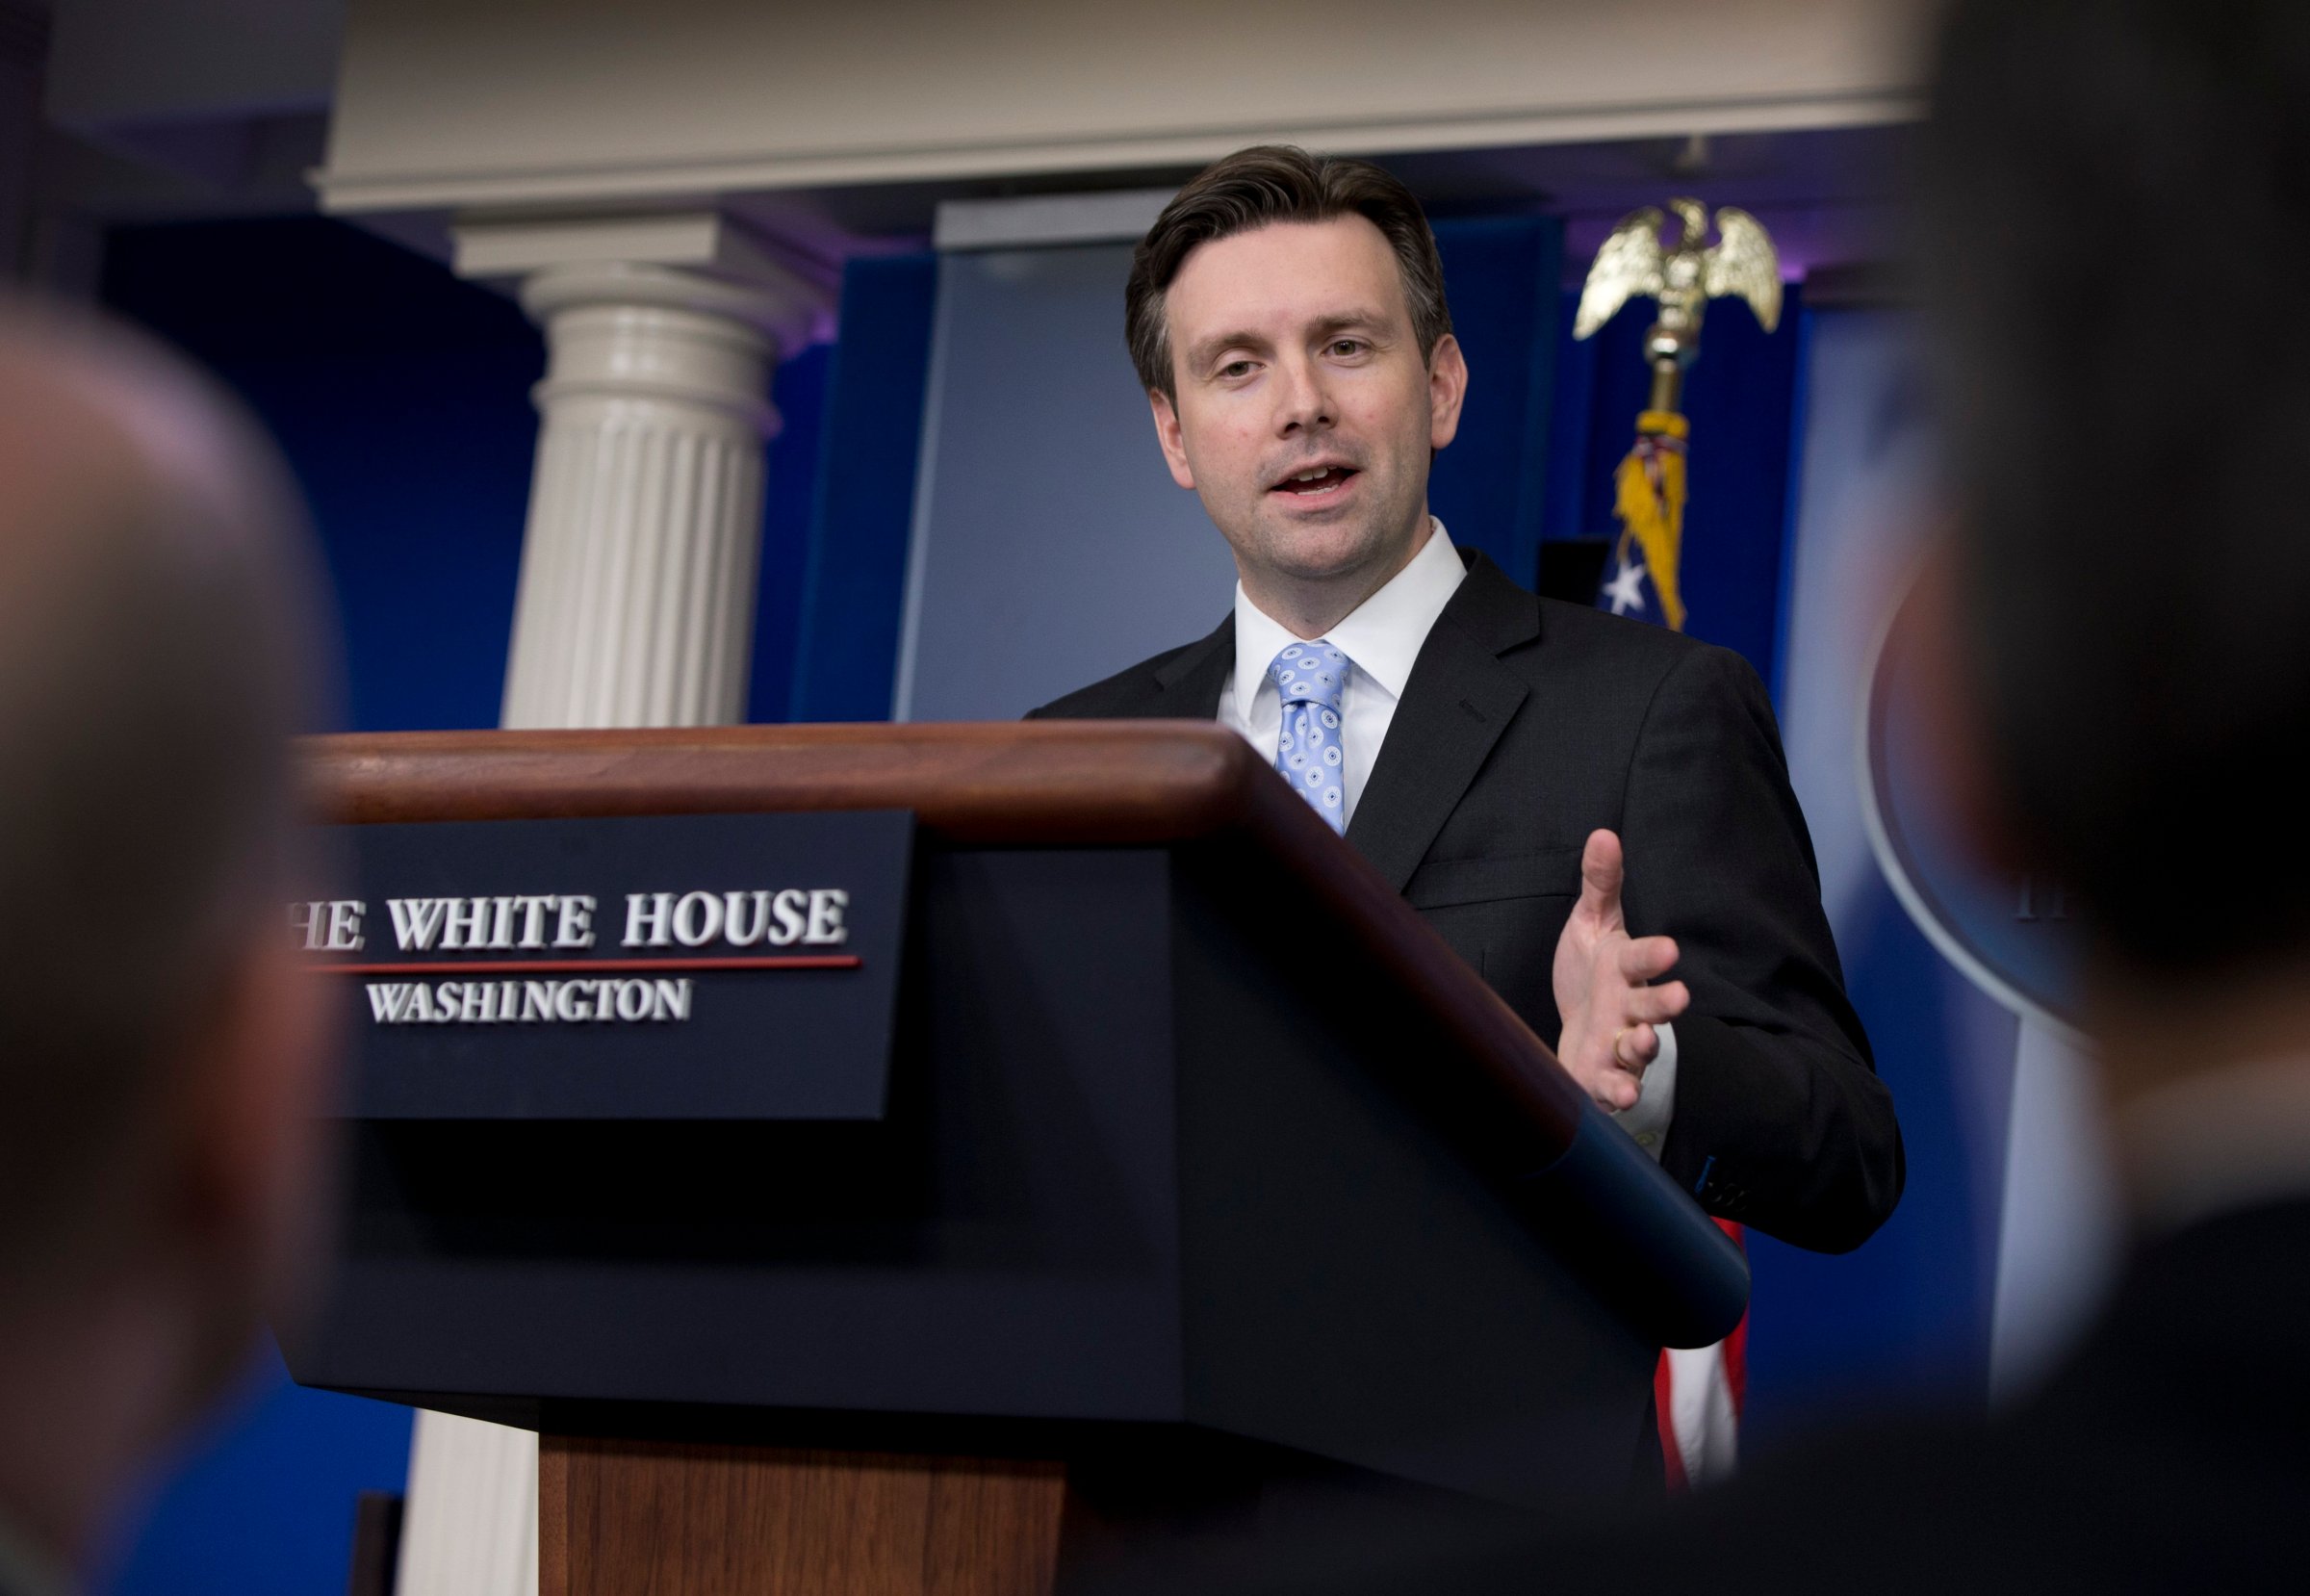 White House press secretary Josh Earnest speaks during the daily news briefing at the White House in Washington on Jan. 30, 2015.